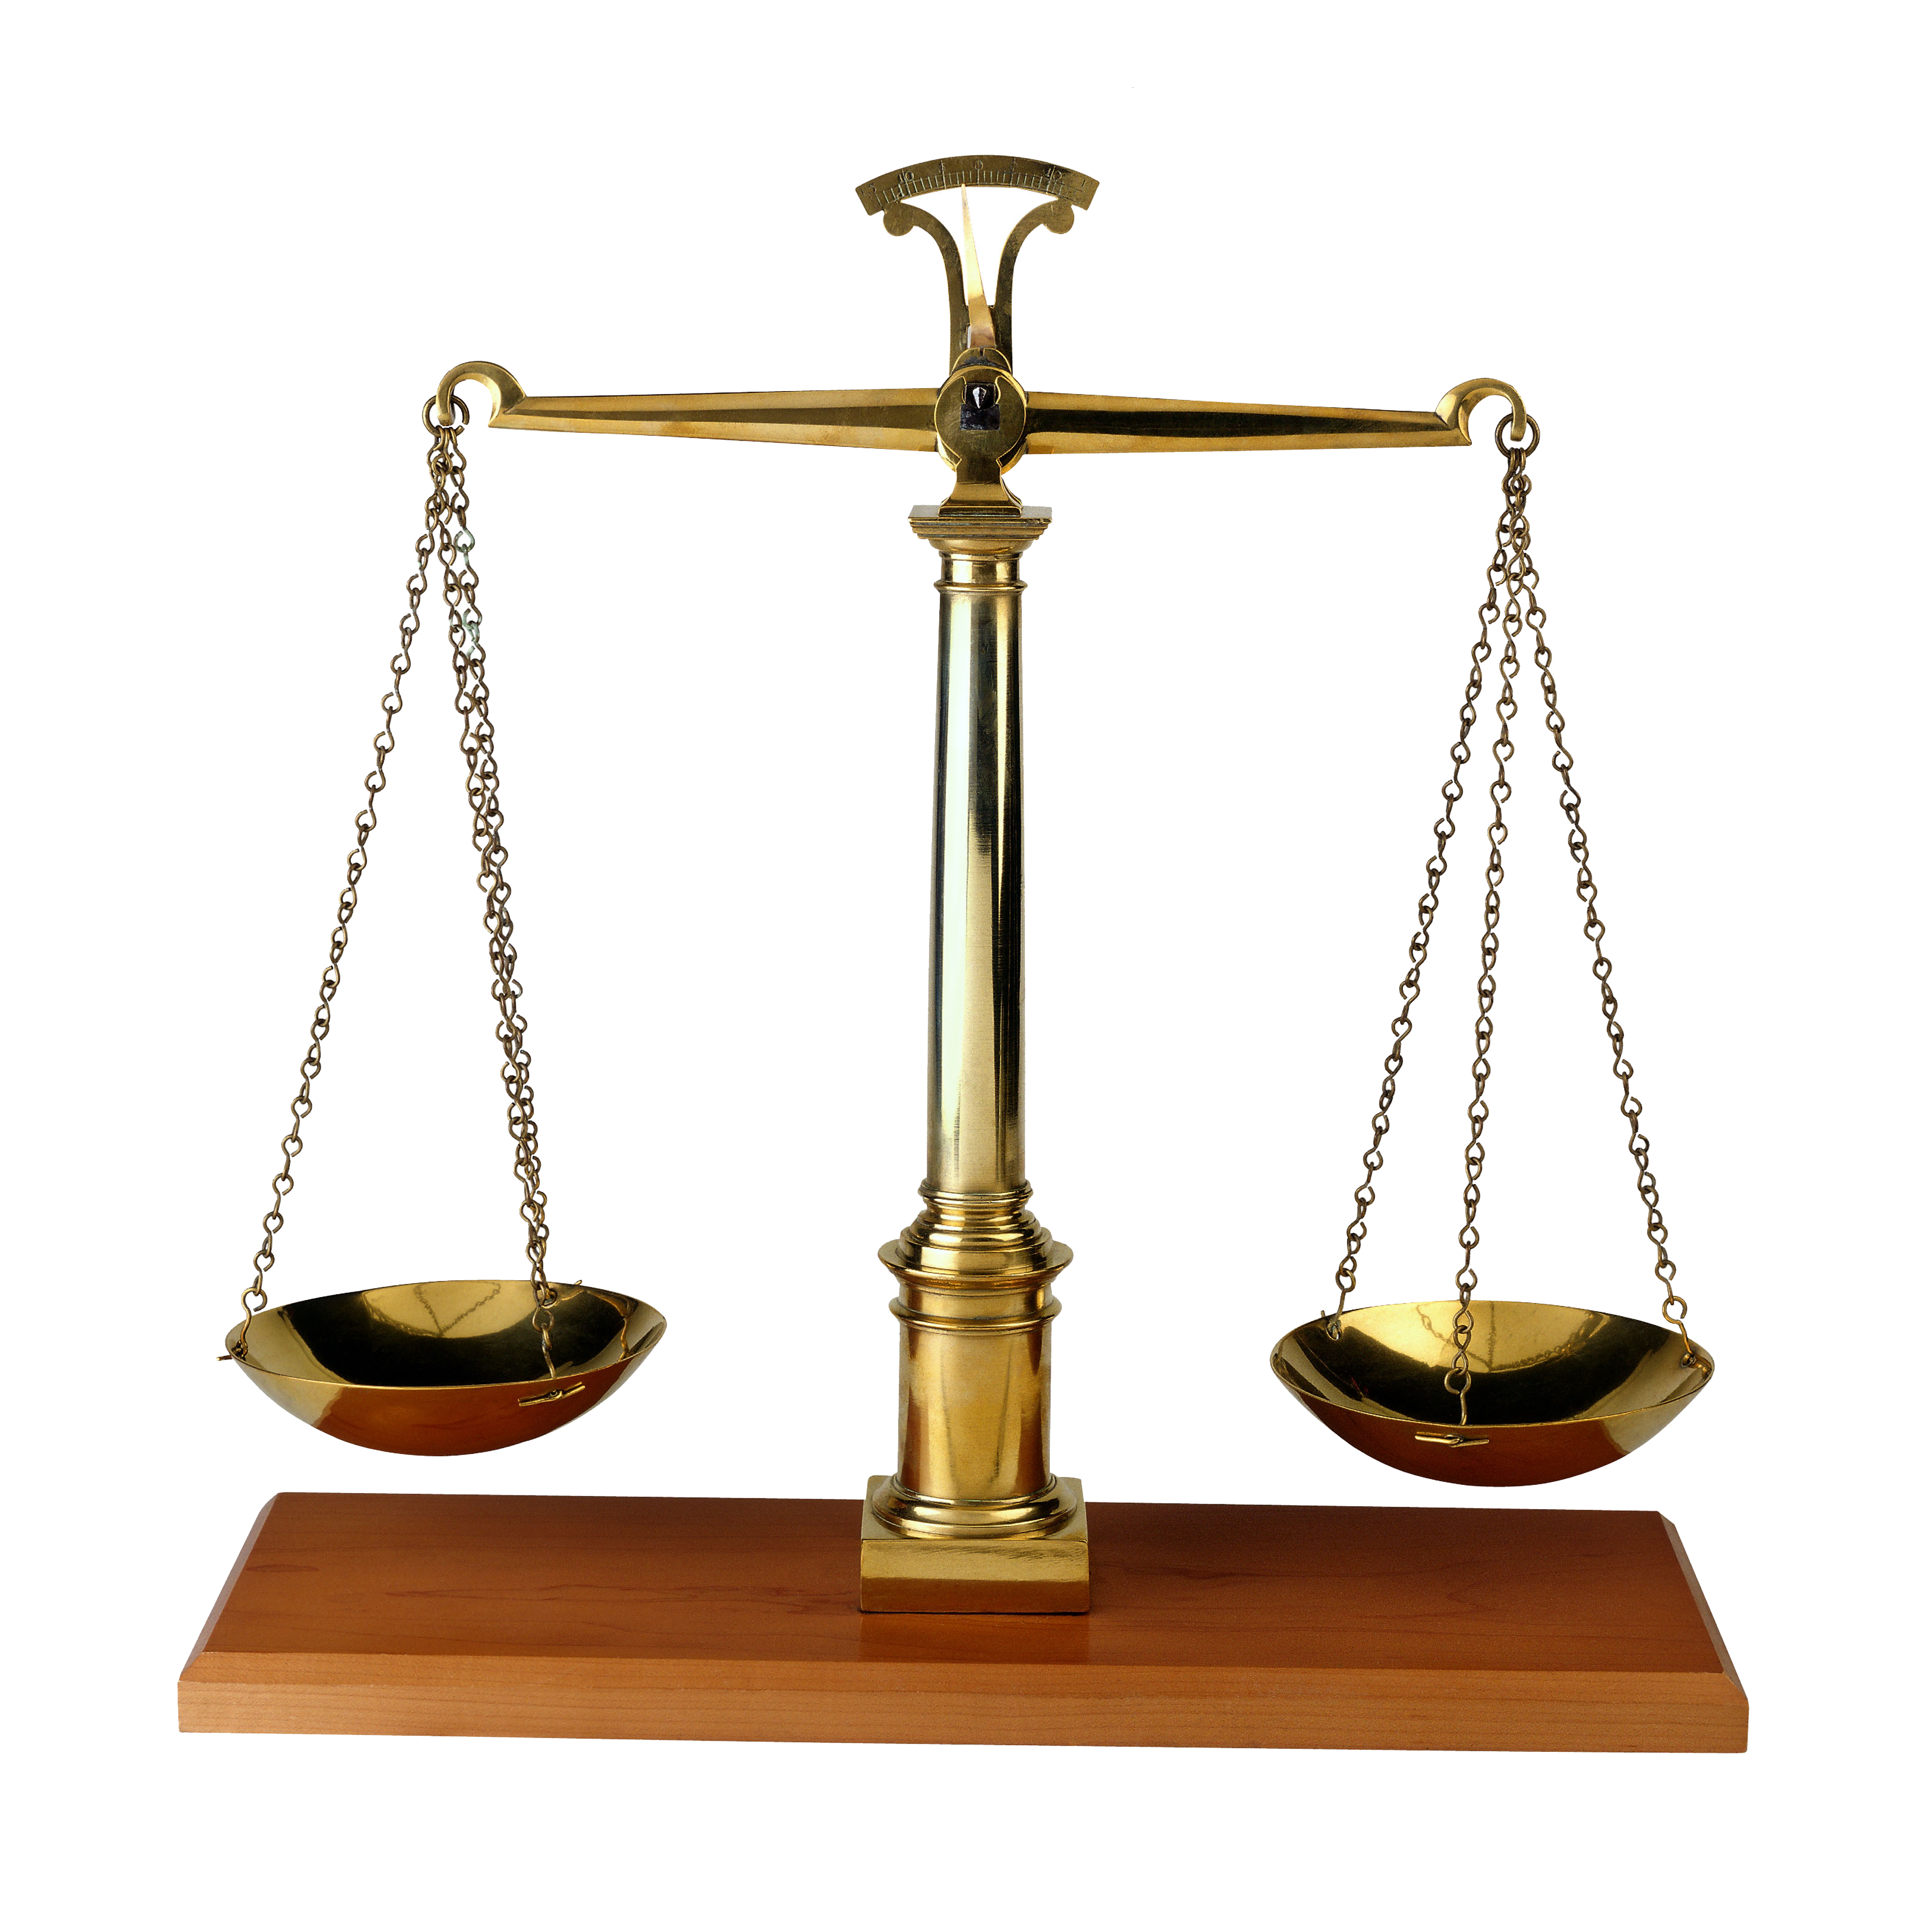 Legal Scales Clipart